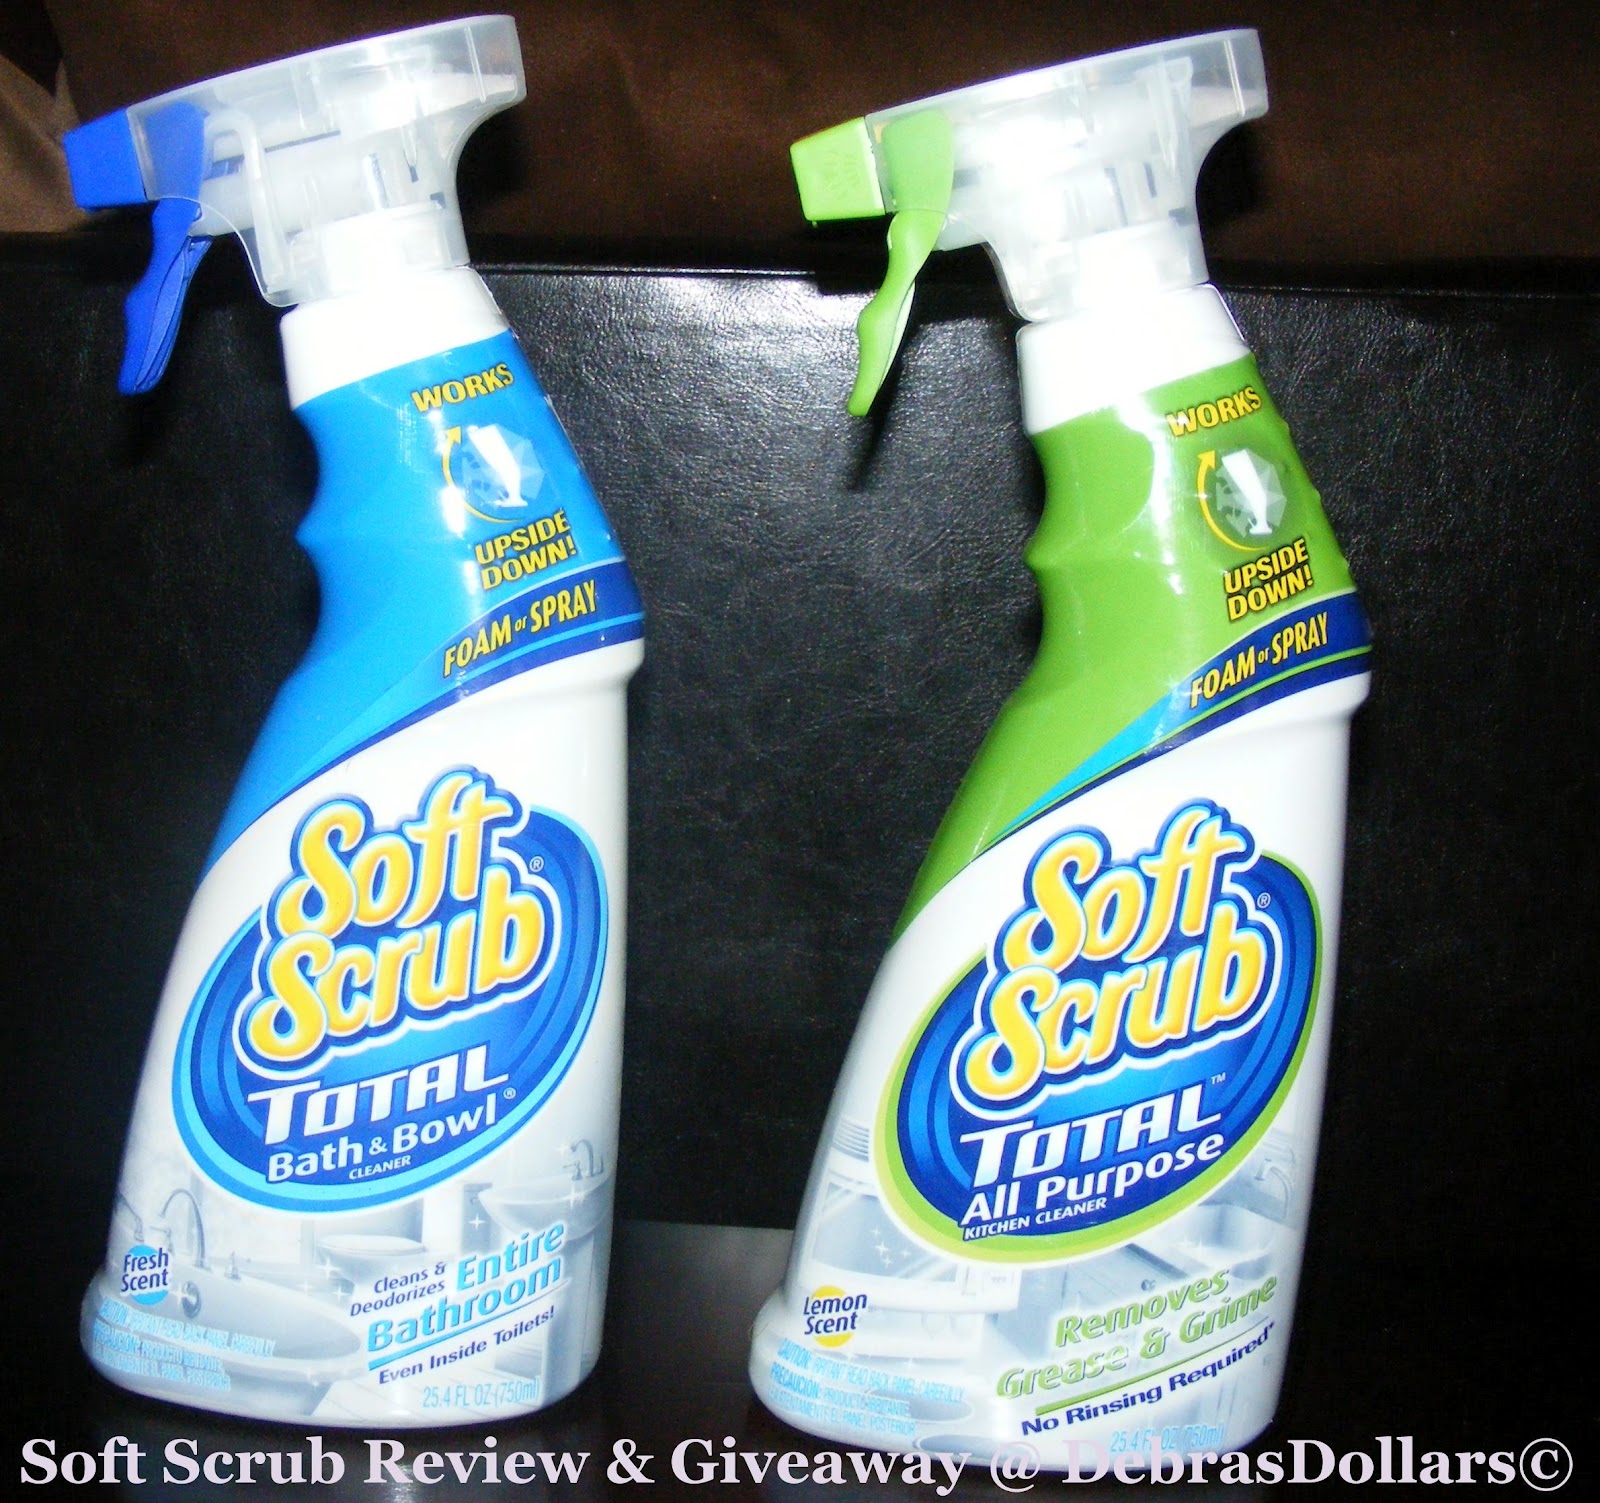 Debras Dollars It Just Makes Cents Soft Scrub Total Review